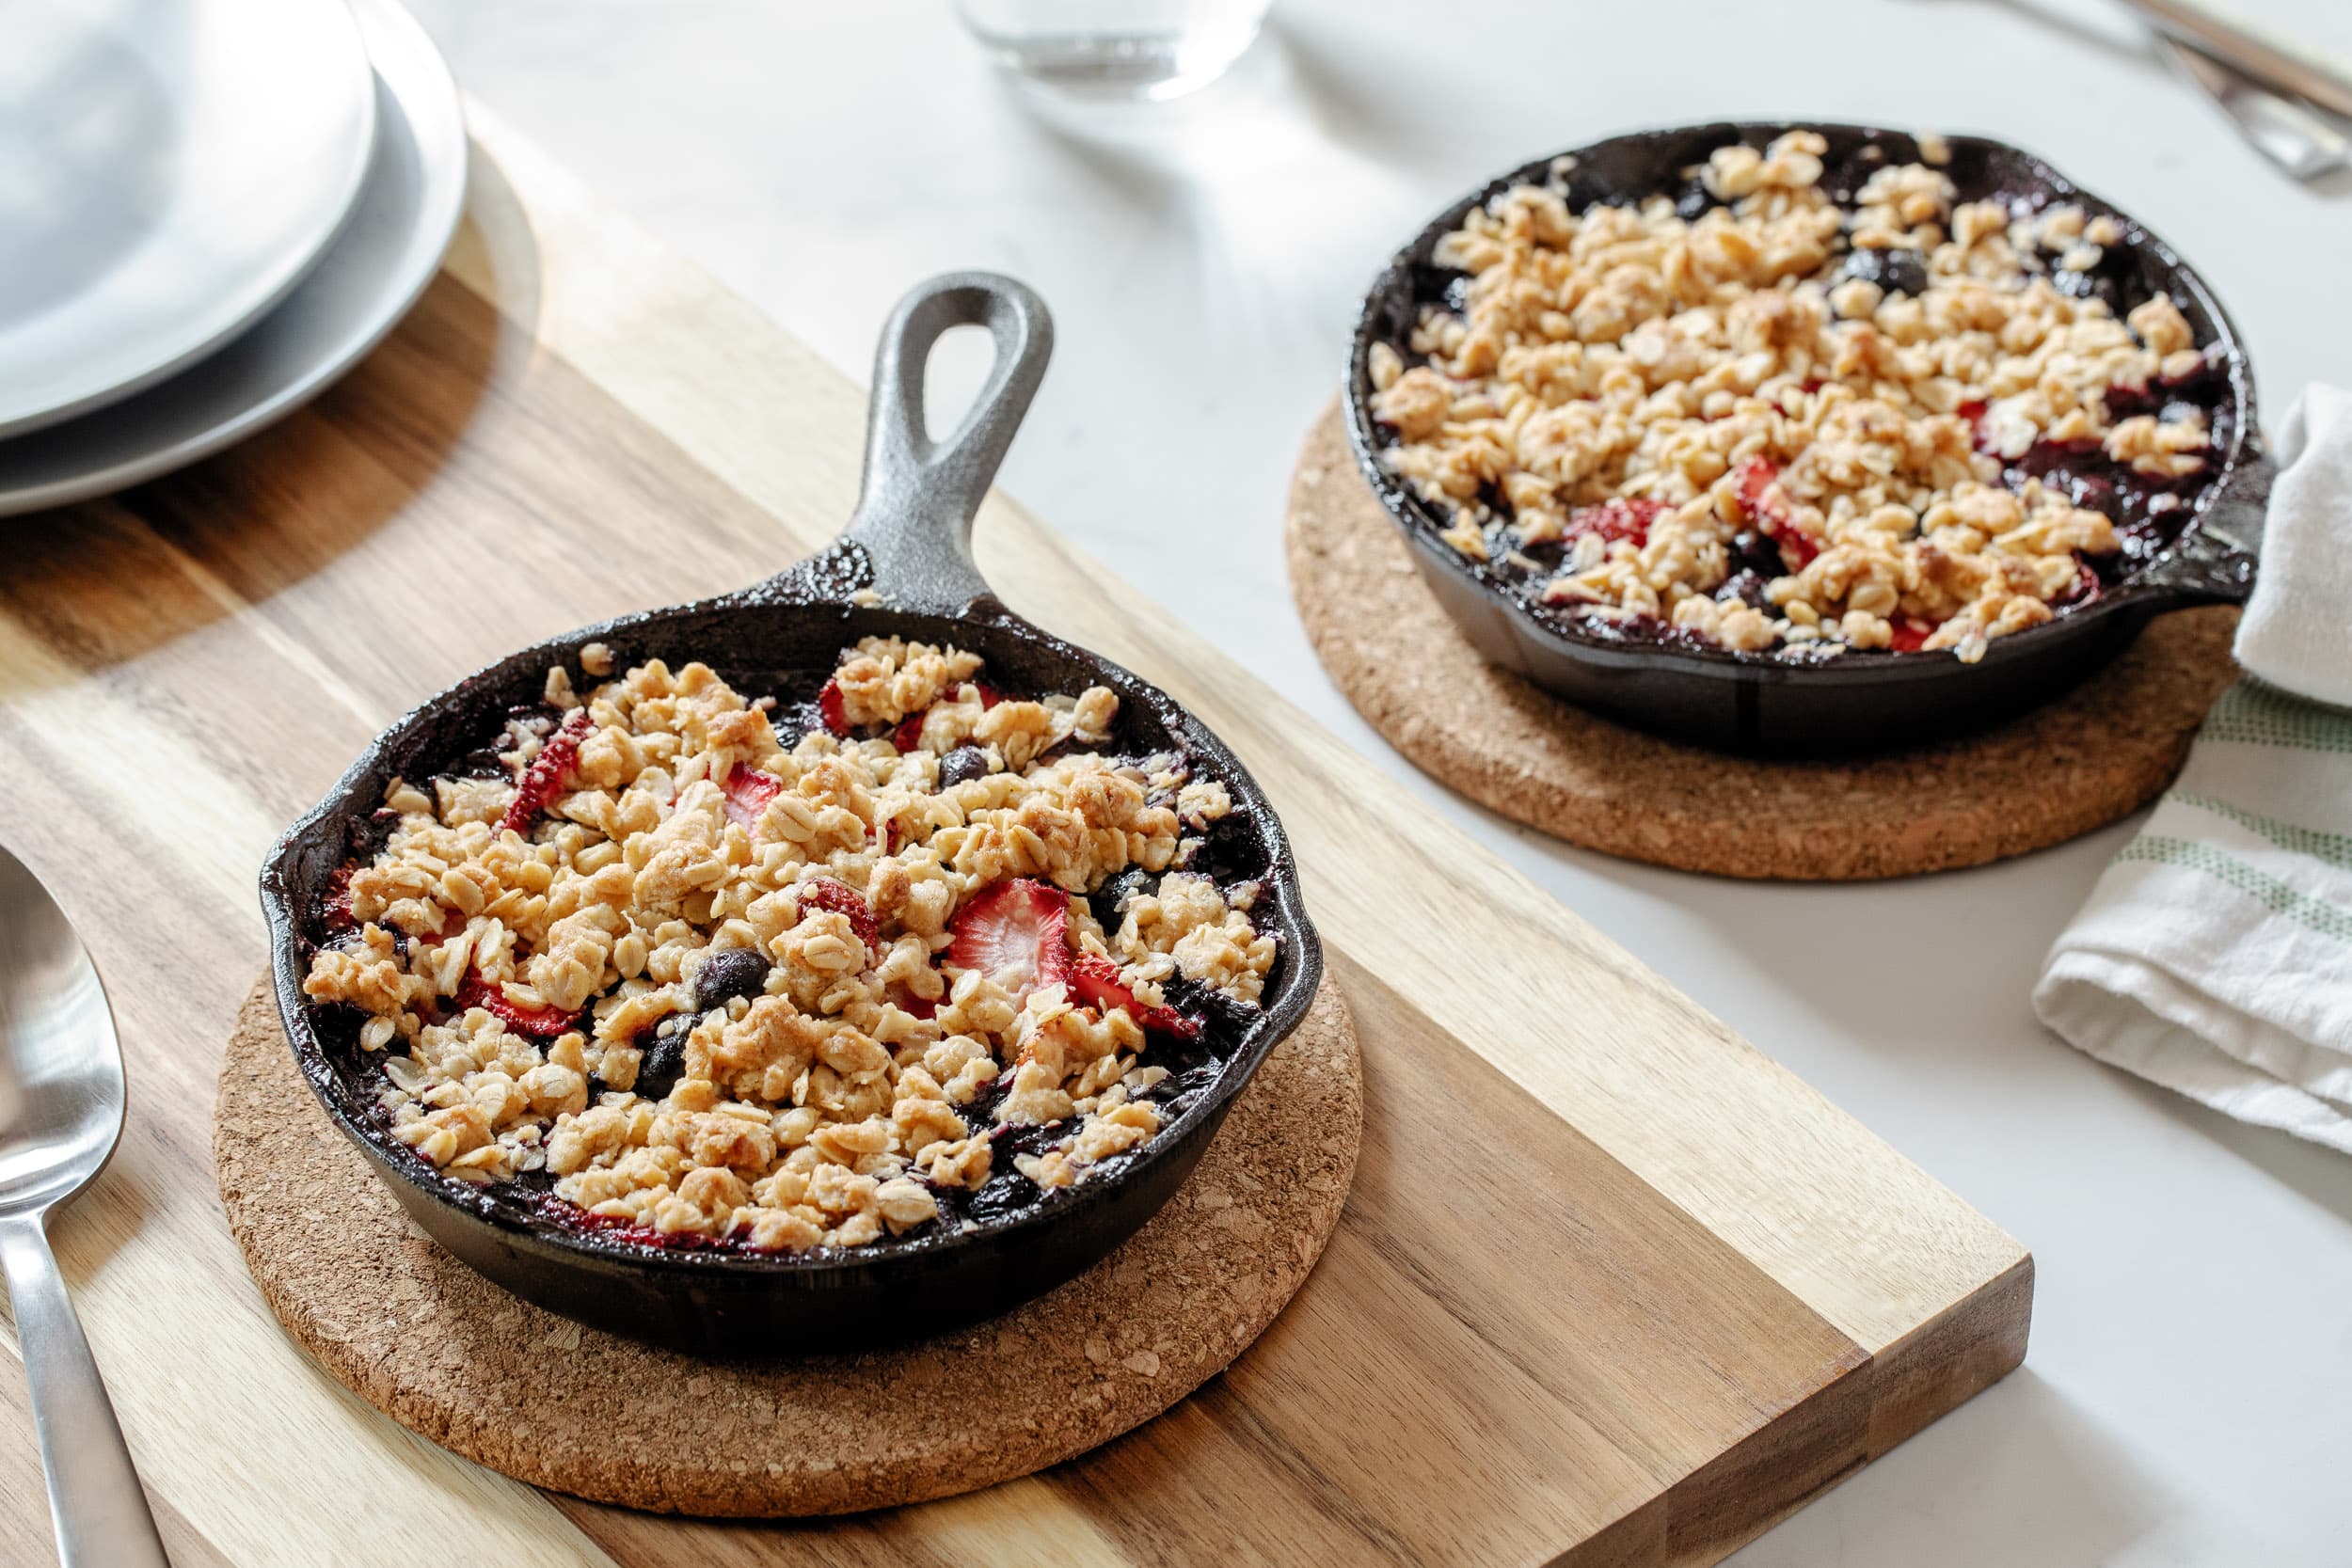 https://cdn.apartmenttherapy.info/image/upload/v1625763514/k/Photo/Lifestyle/2021-07-These-Mini-Cast-Iron-Skillets-Are-Made-for-Summer-y-Desserts%20/kitchn-2021-mini-cast-iron-skillet-2.jpg